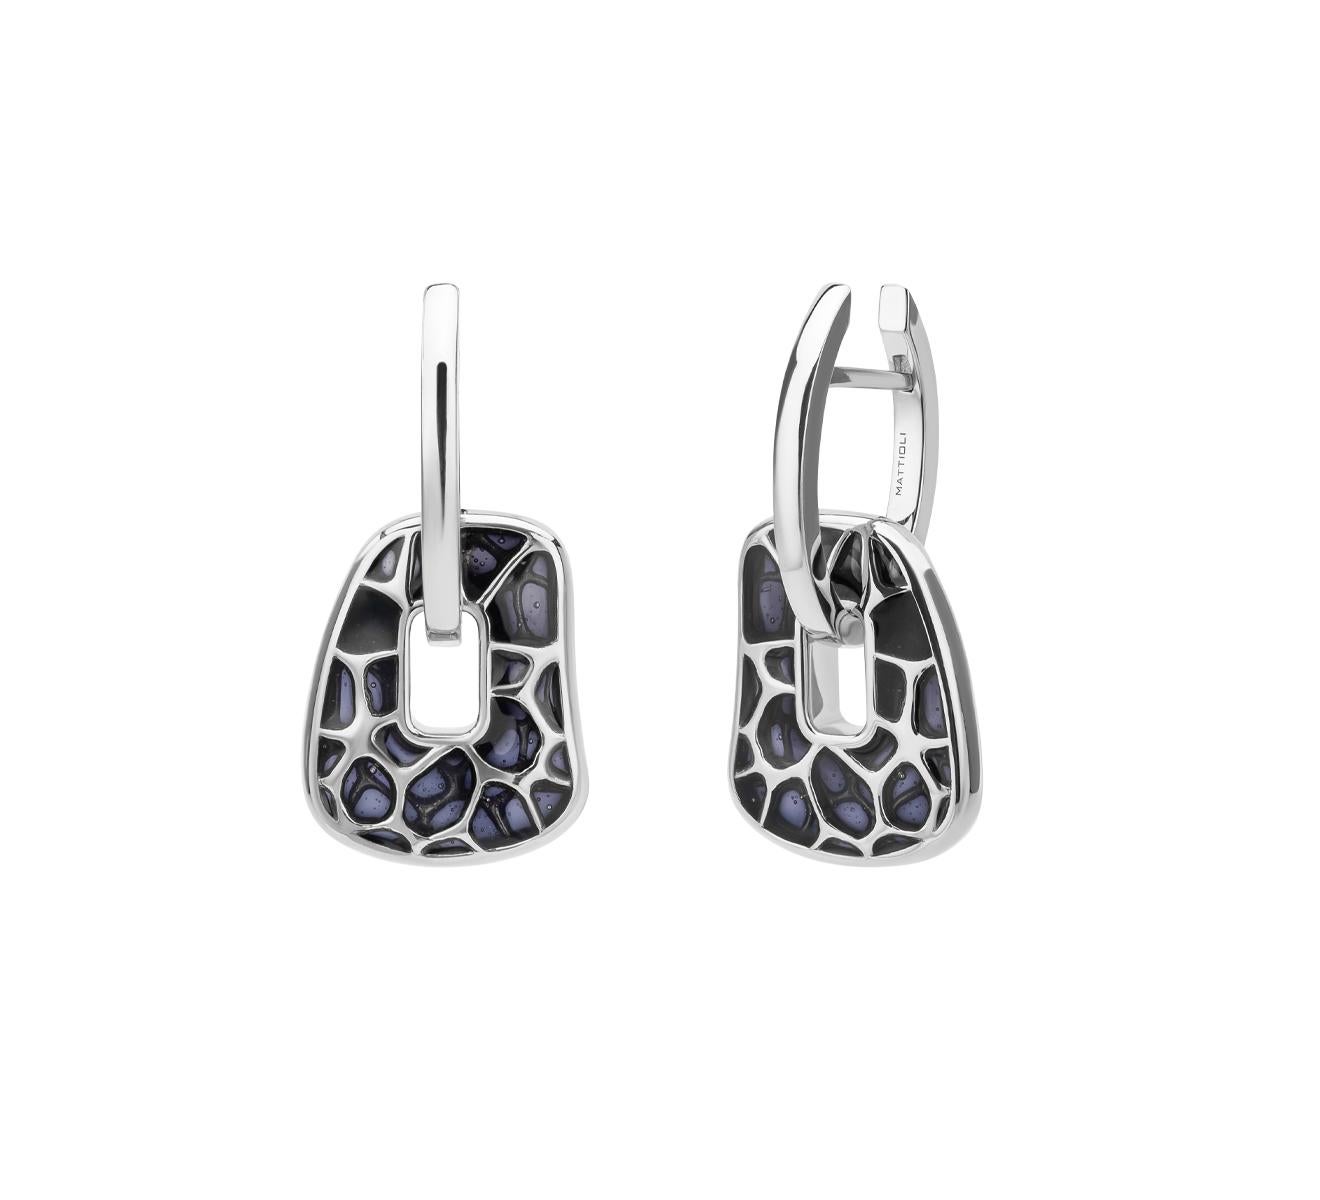 Mattioli Puzzle Safari Earrings 18K White Gold Black Enamel & 2 Pendants Small Size
Earrings in White Gold
Weight 19.60 gr 
Measure 15x18mm or 0.60x0.70 in
Puzzle pendants of mother of pearl you can choose between 25 colour palette
Also Available in